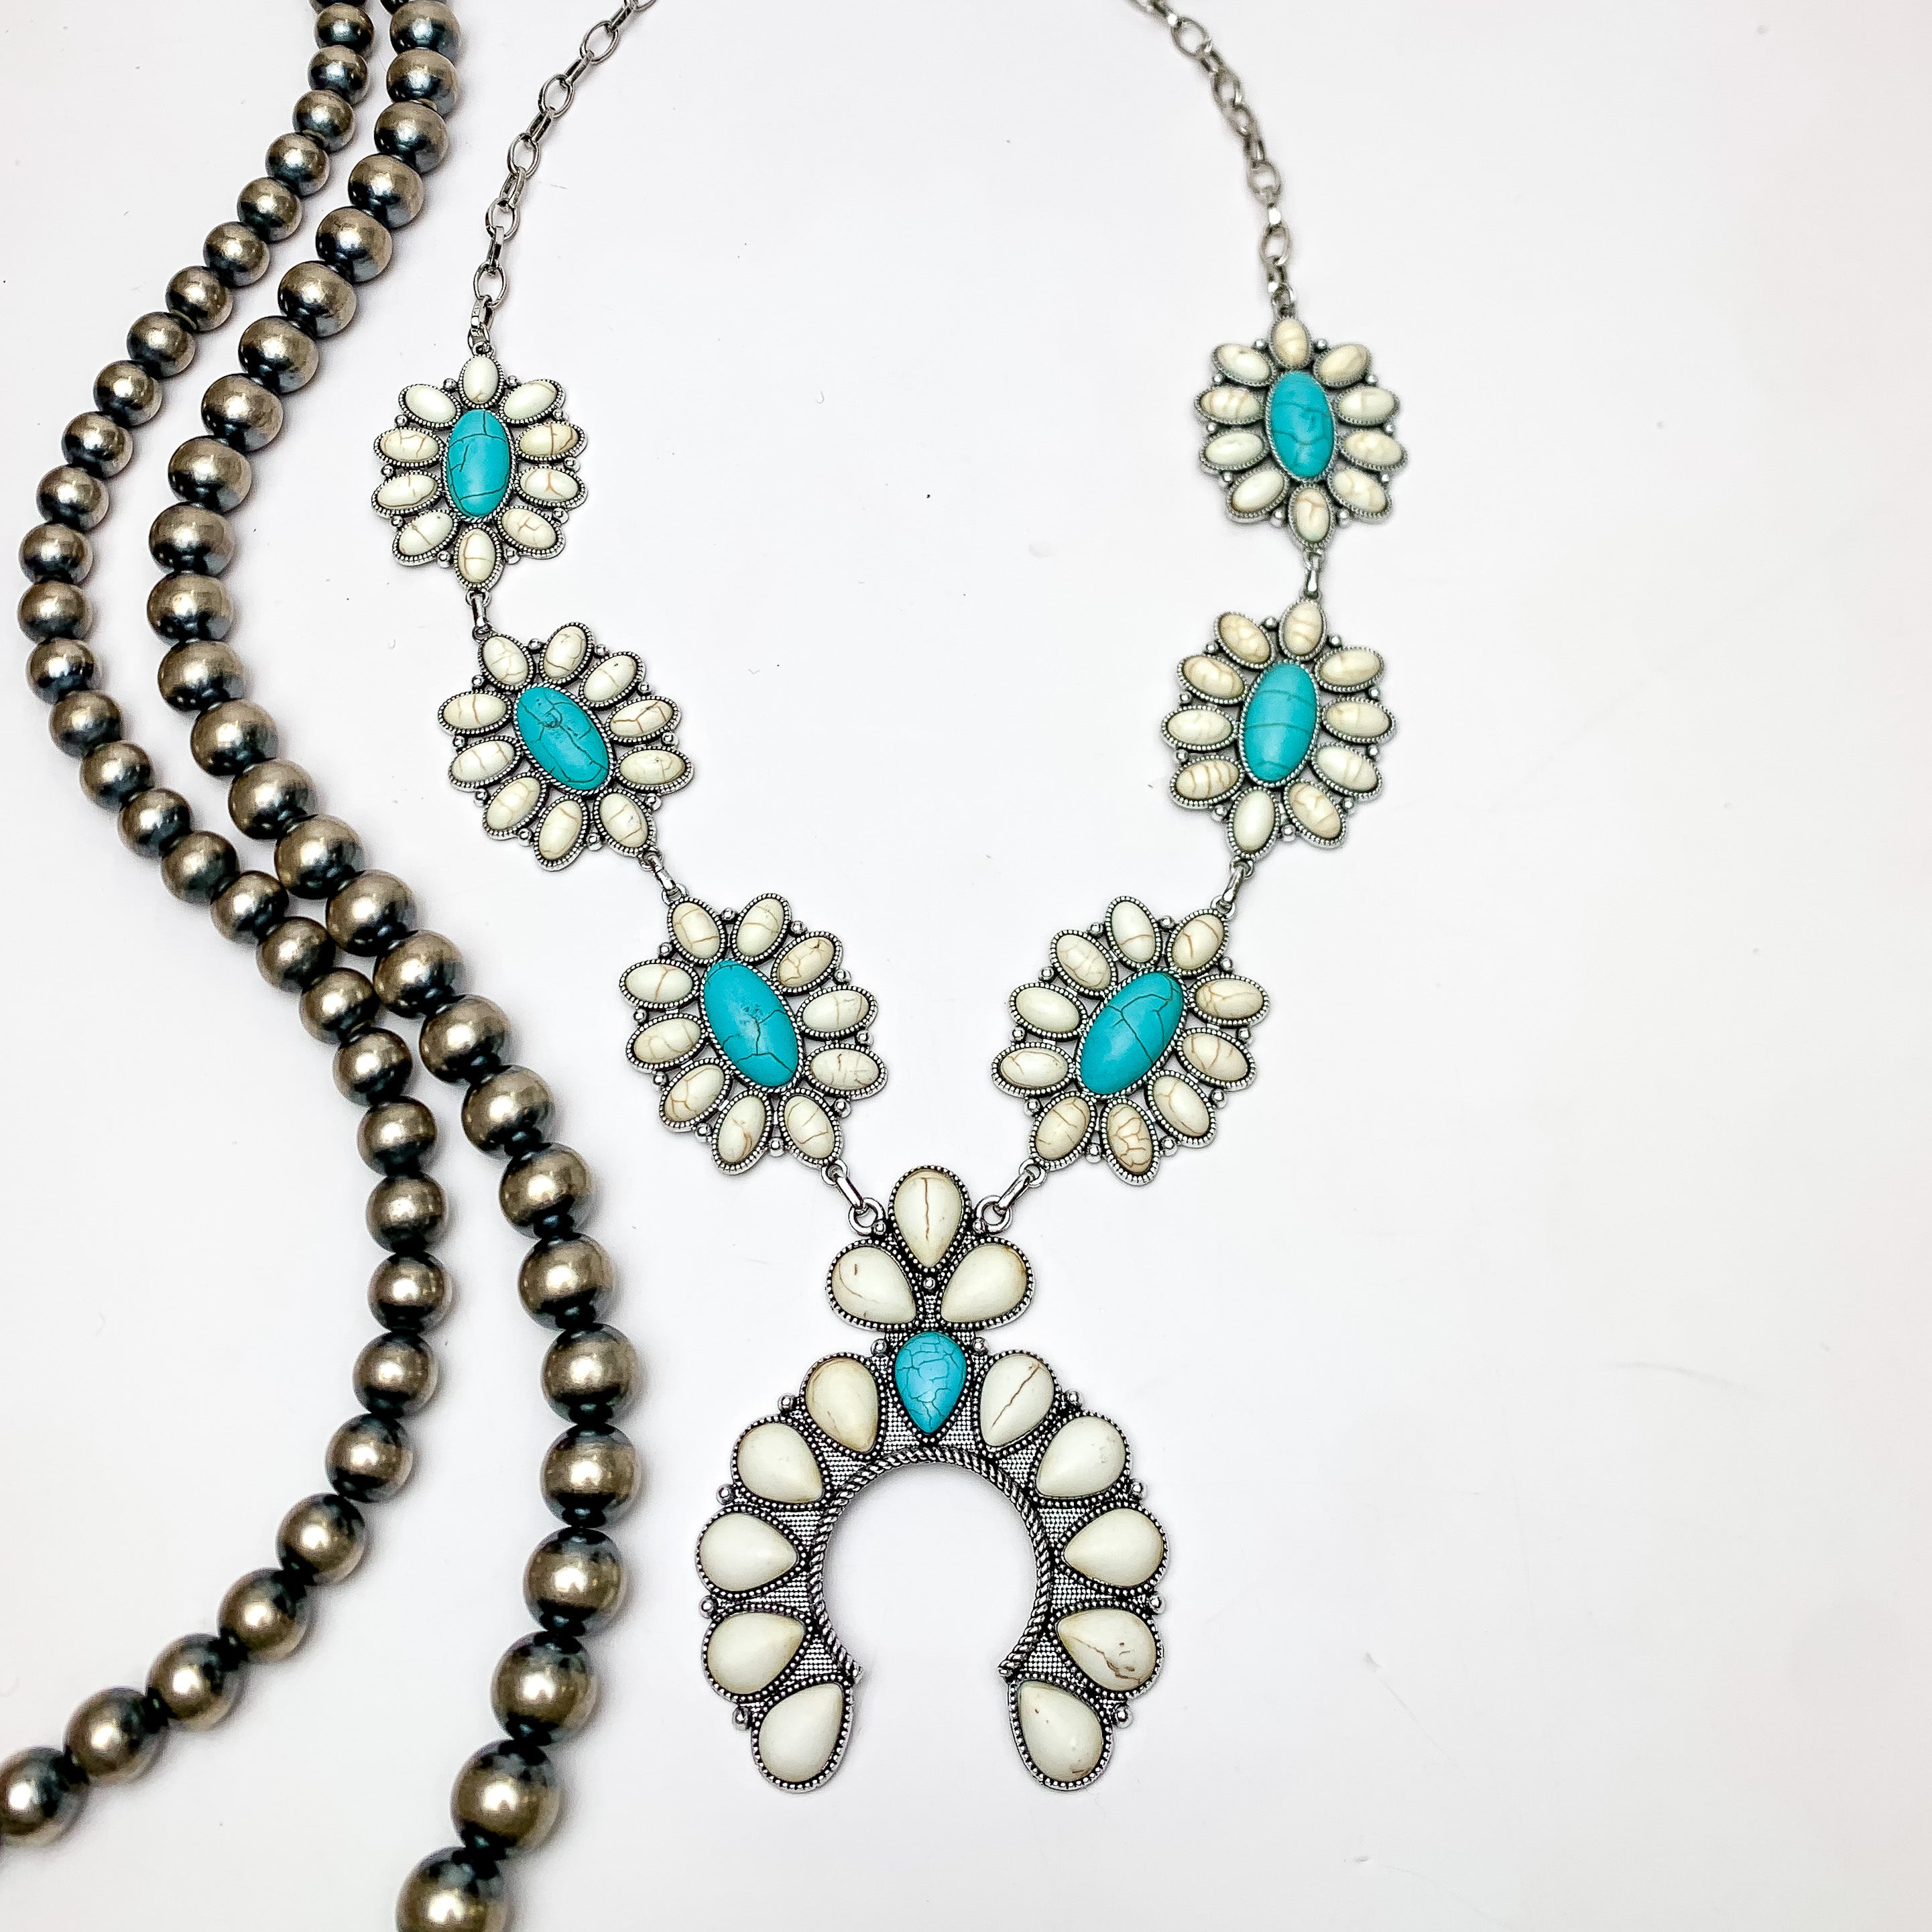 Squash Necklace with Oval Flowers in Silver Tone, Turquoise, and White. This necklace is pictured on a white background with Navajo pearls on the left side.